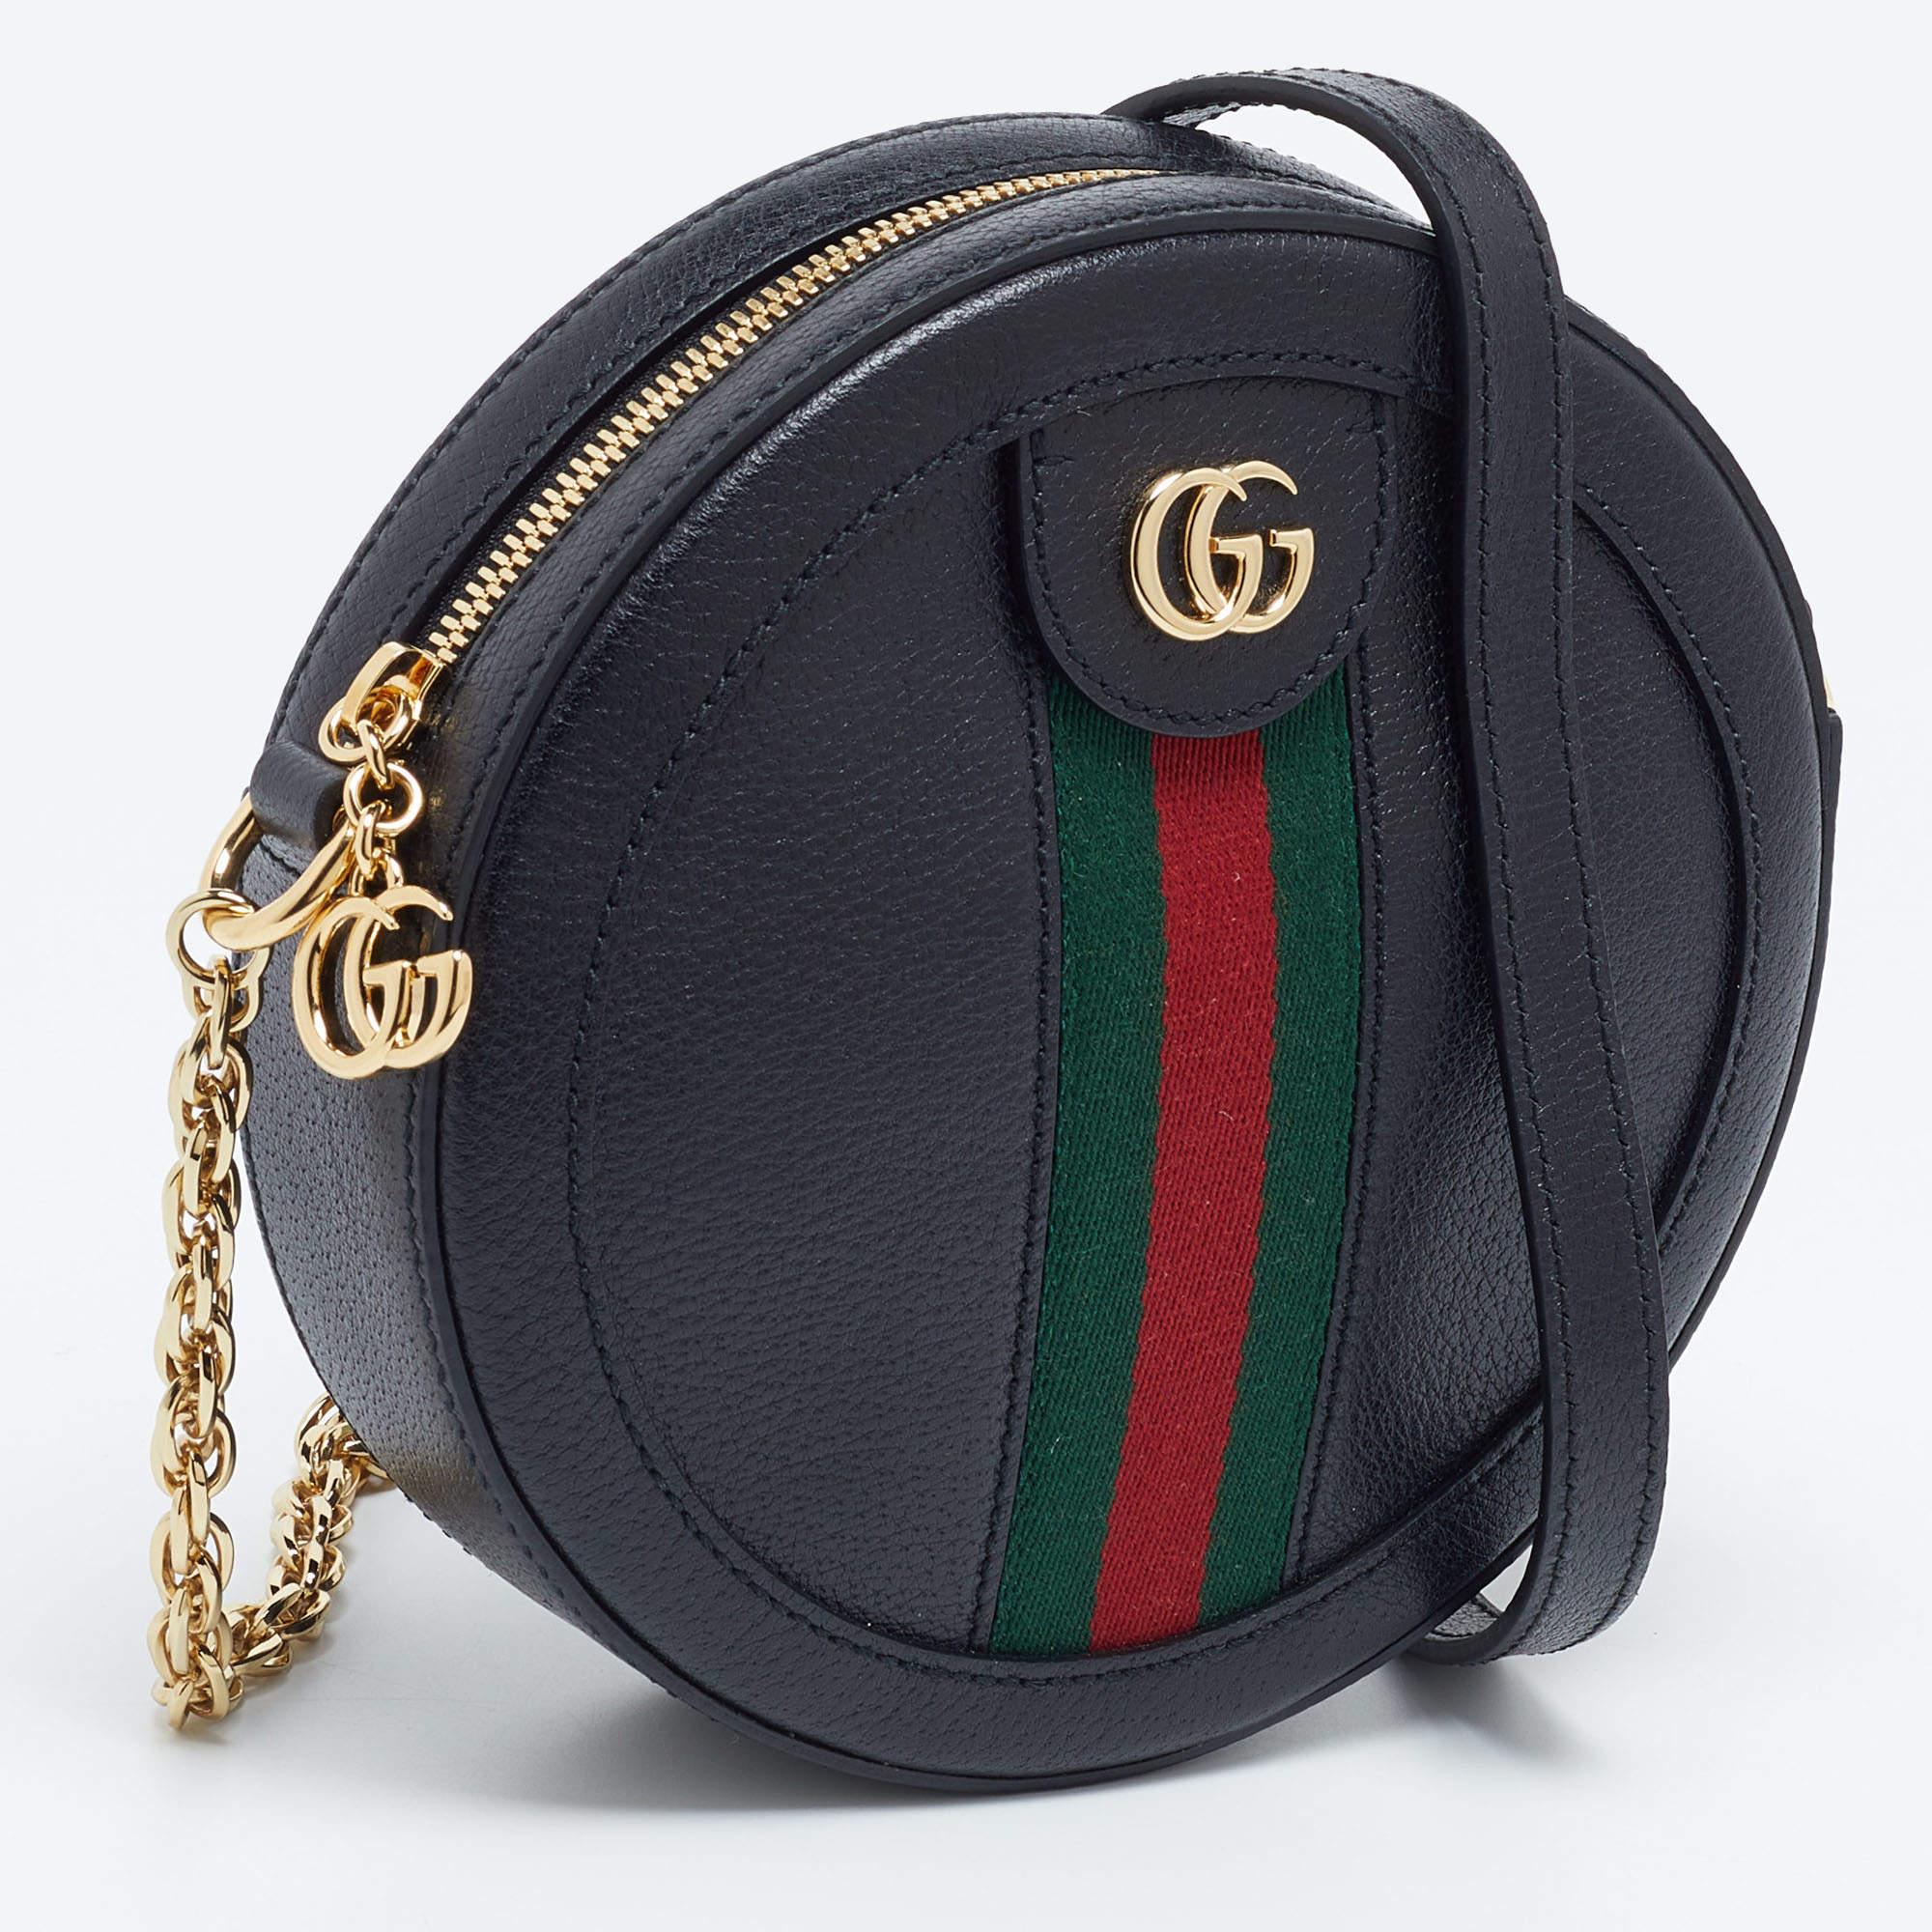 Offering a mix of style and function, this authentic Gucci shoulder bag for women has been created to fit in your essentials and more. Whether you're headed to work or out shopping, it is the perfect accessory to complete any outfit.

